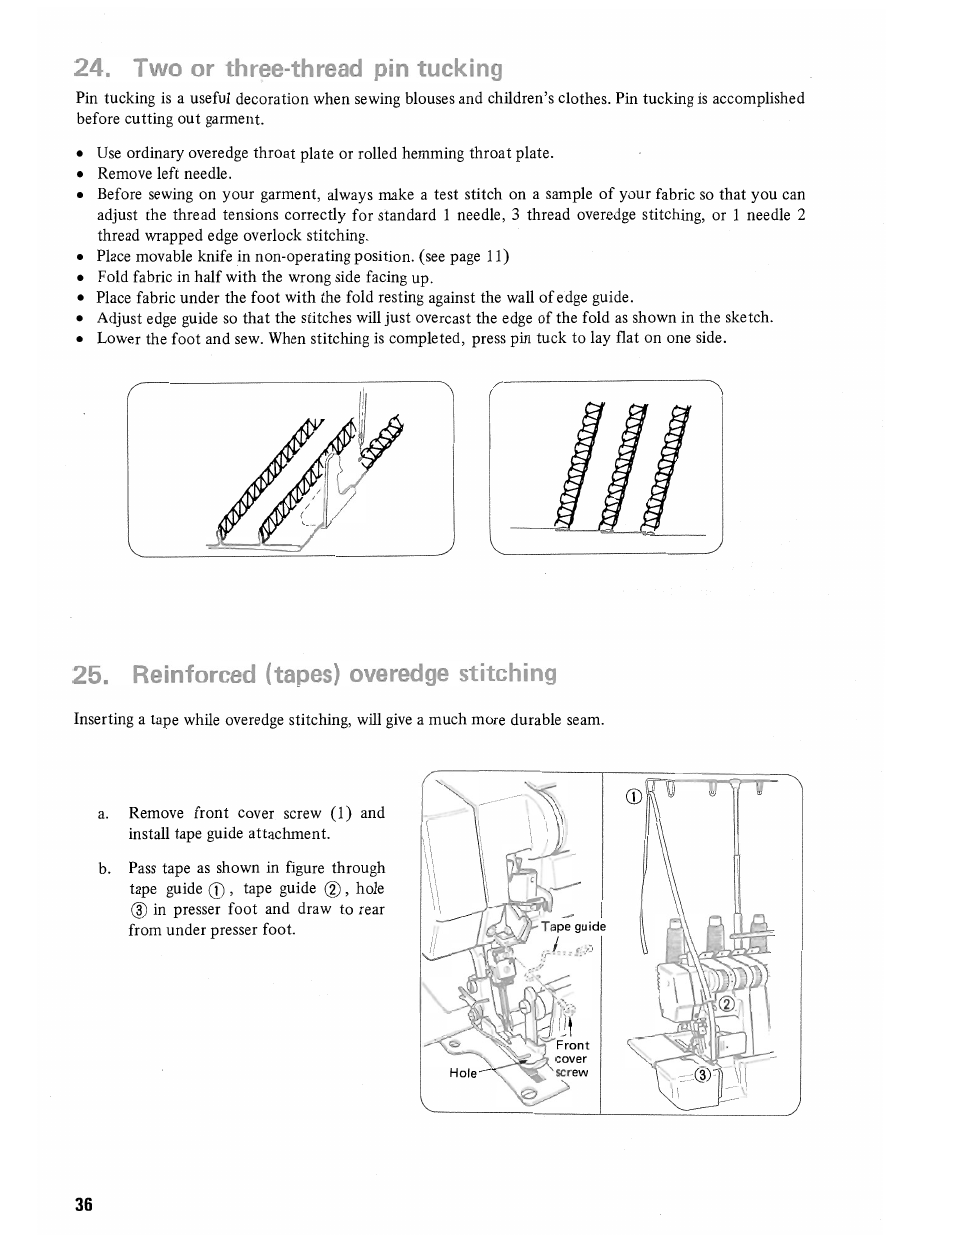 24, two or three-thread pin tucking, Reinforced (tapes) overedge stitching, Two or three-thread pin tucking | SINGER 14U285B User Manual | Page 38 / 48